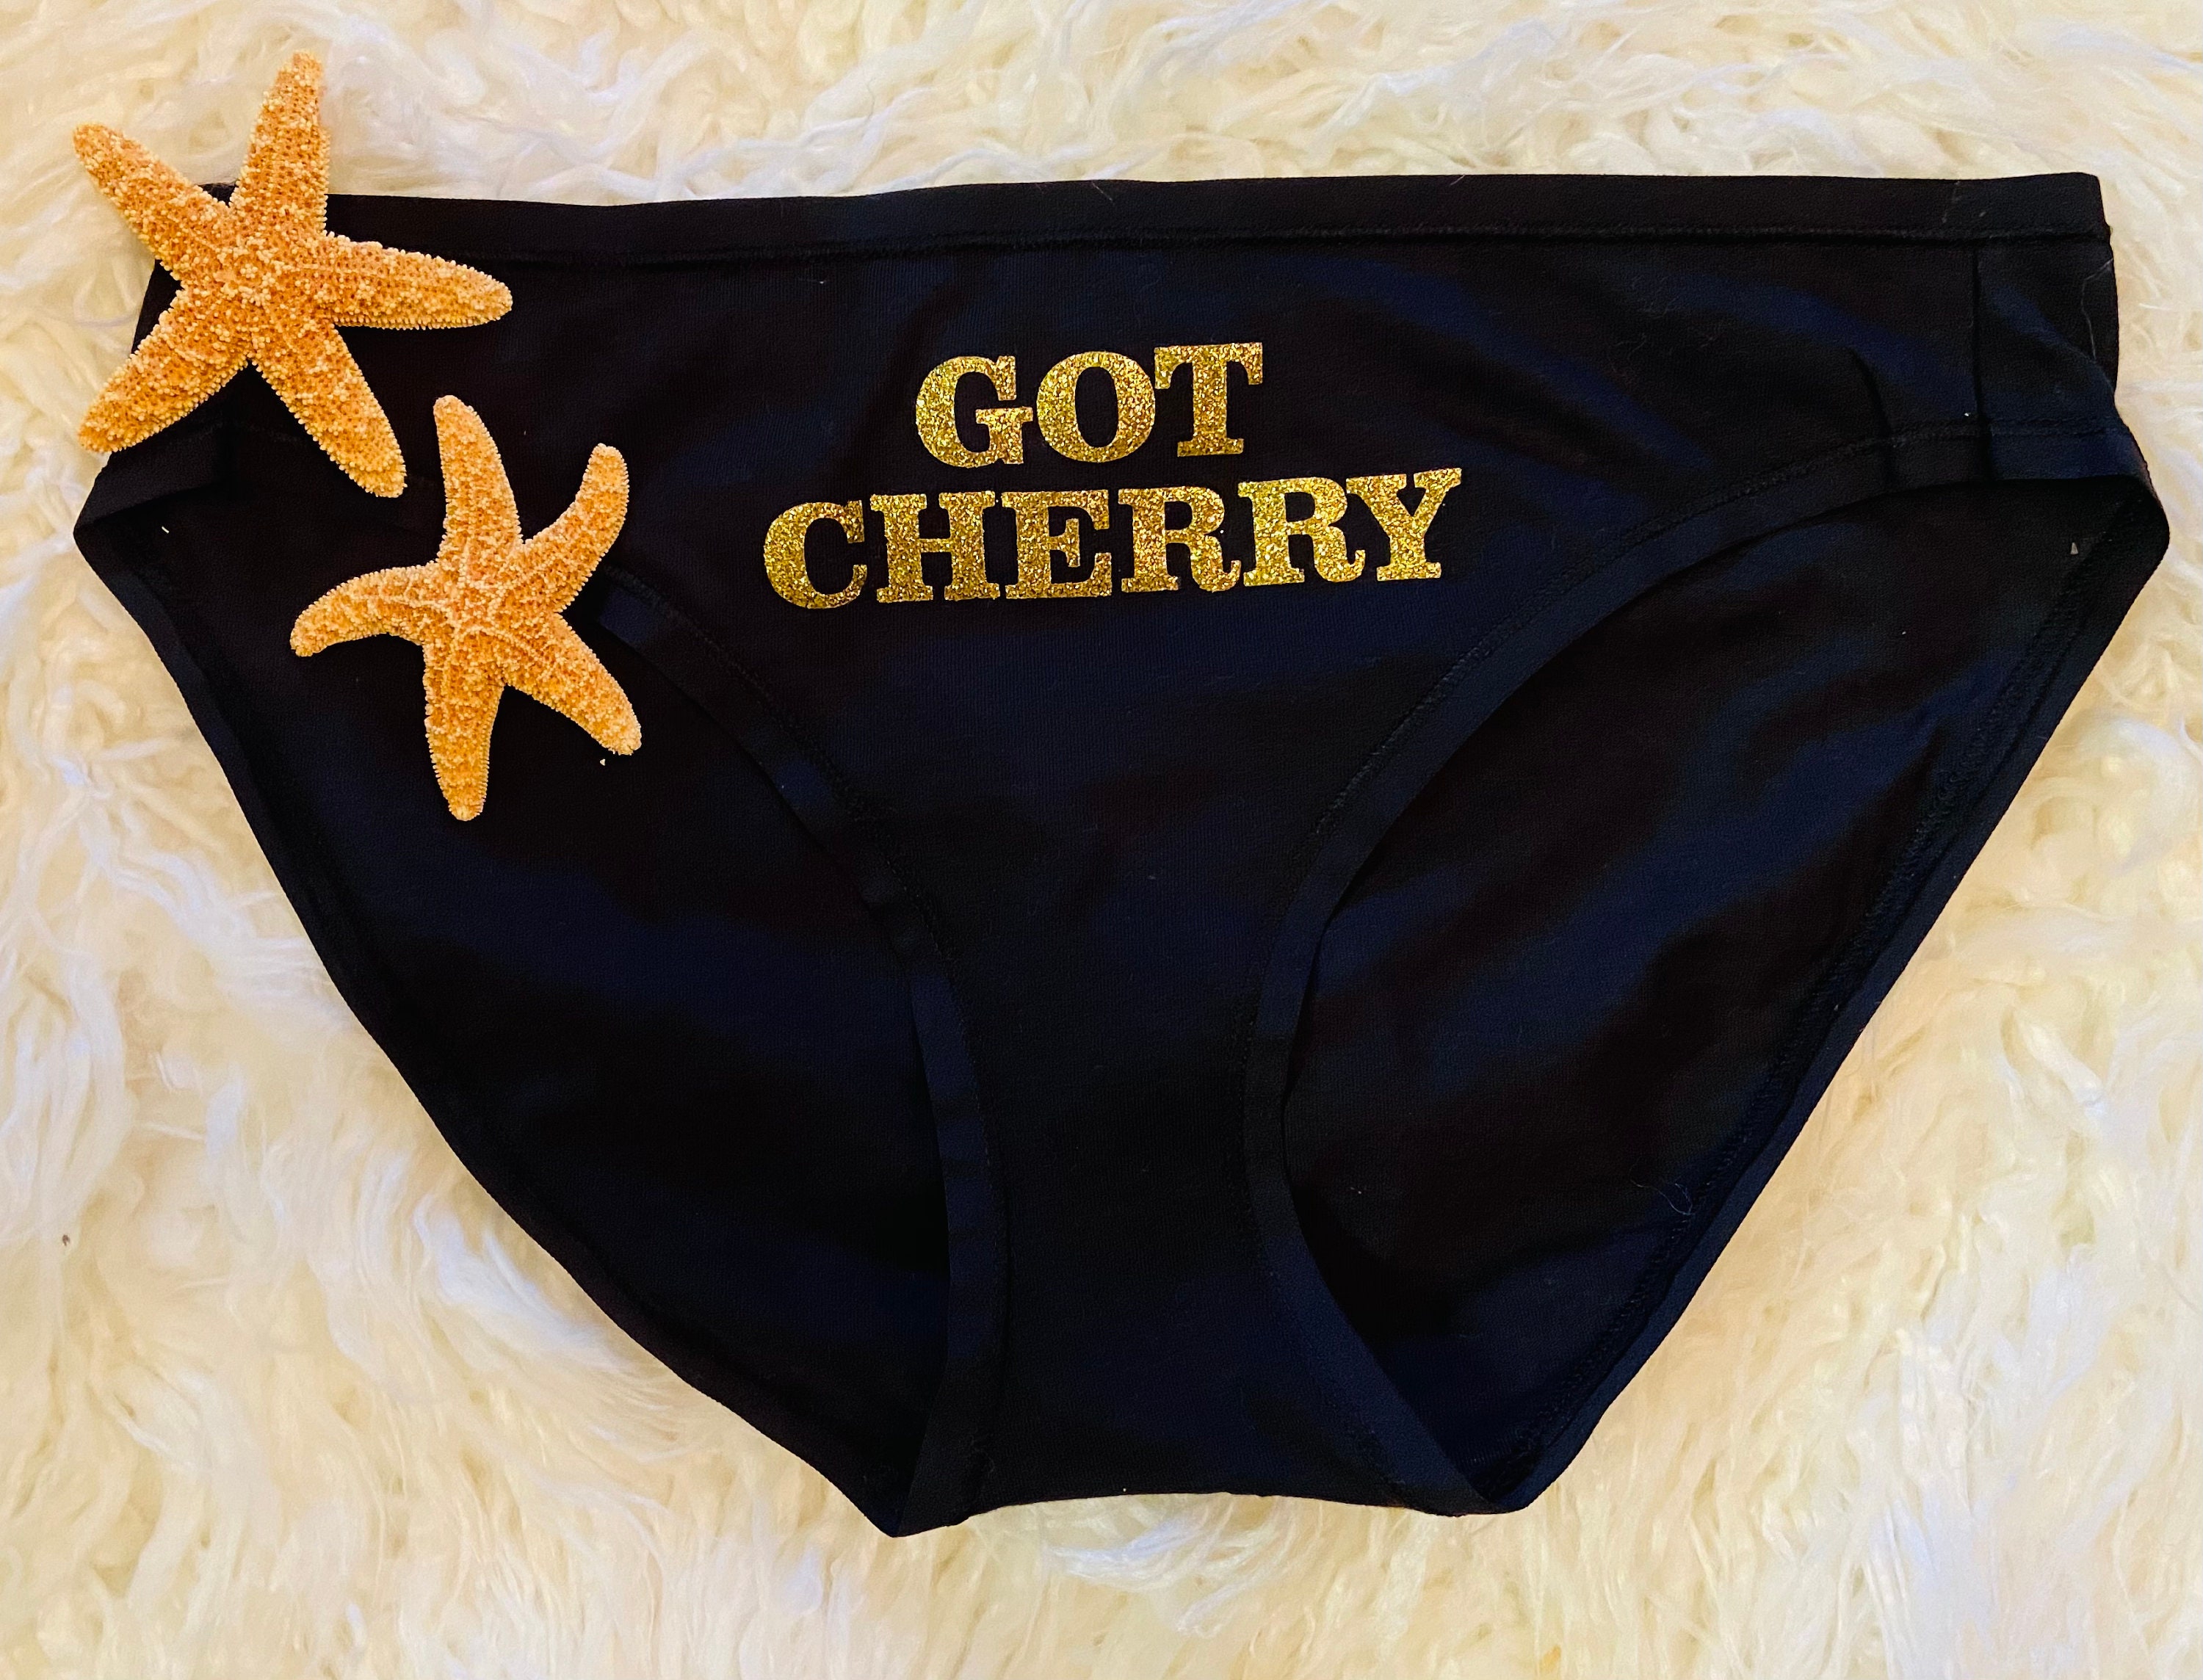 Got cherry?? Naughty panties to get the mood going!